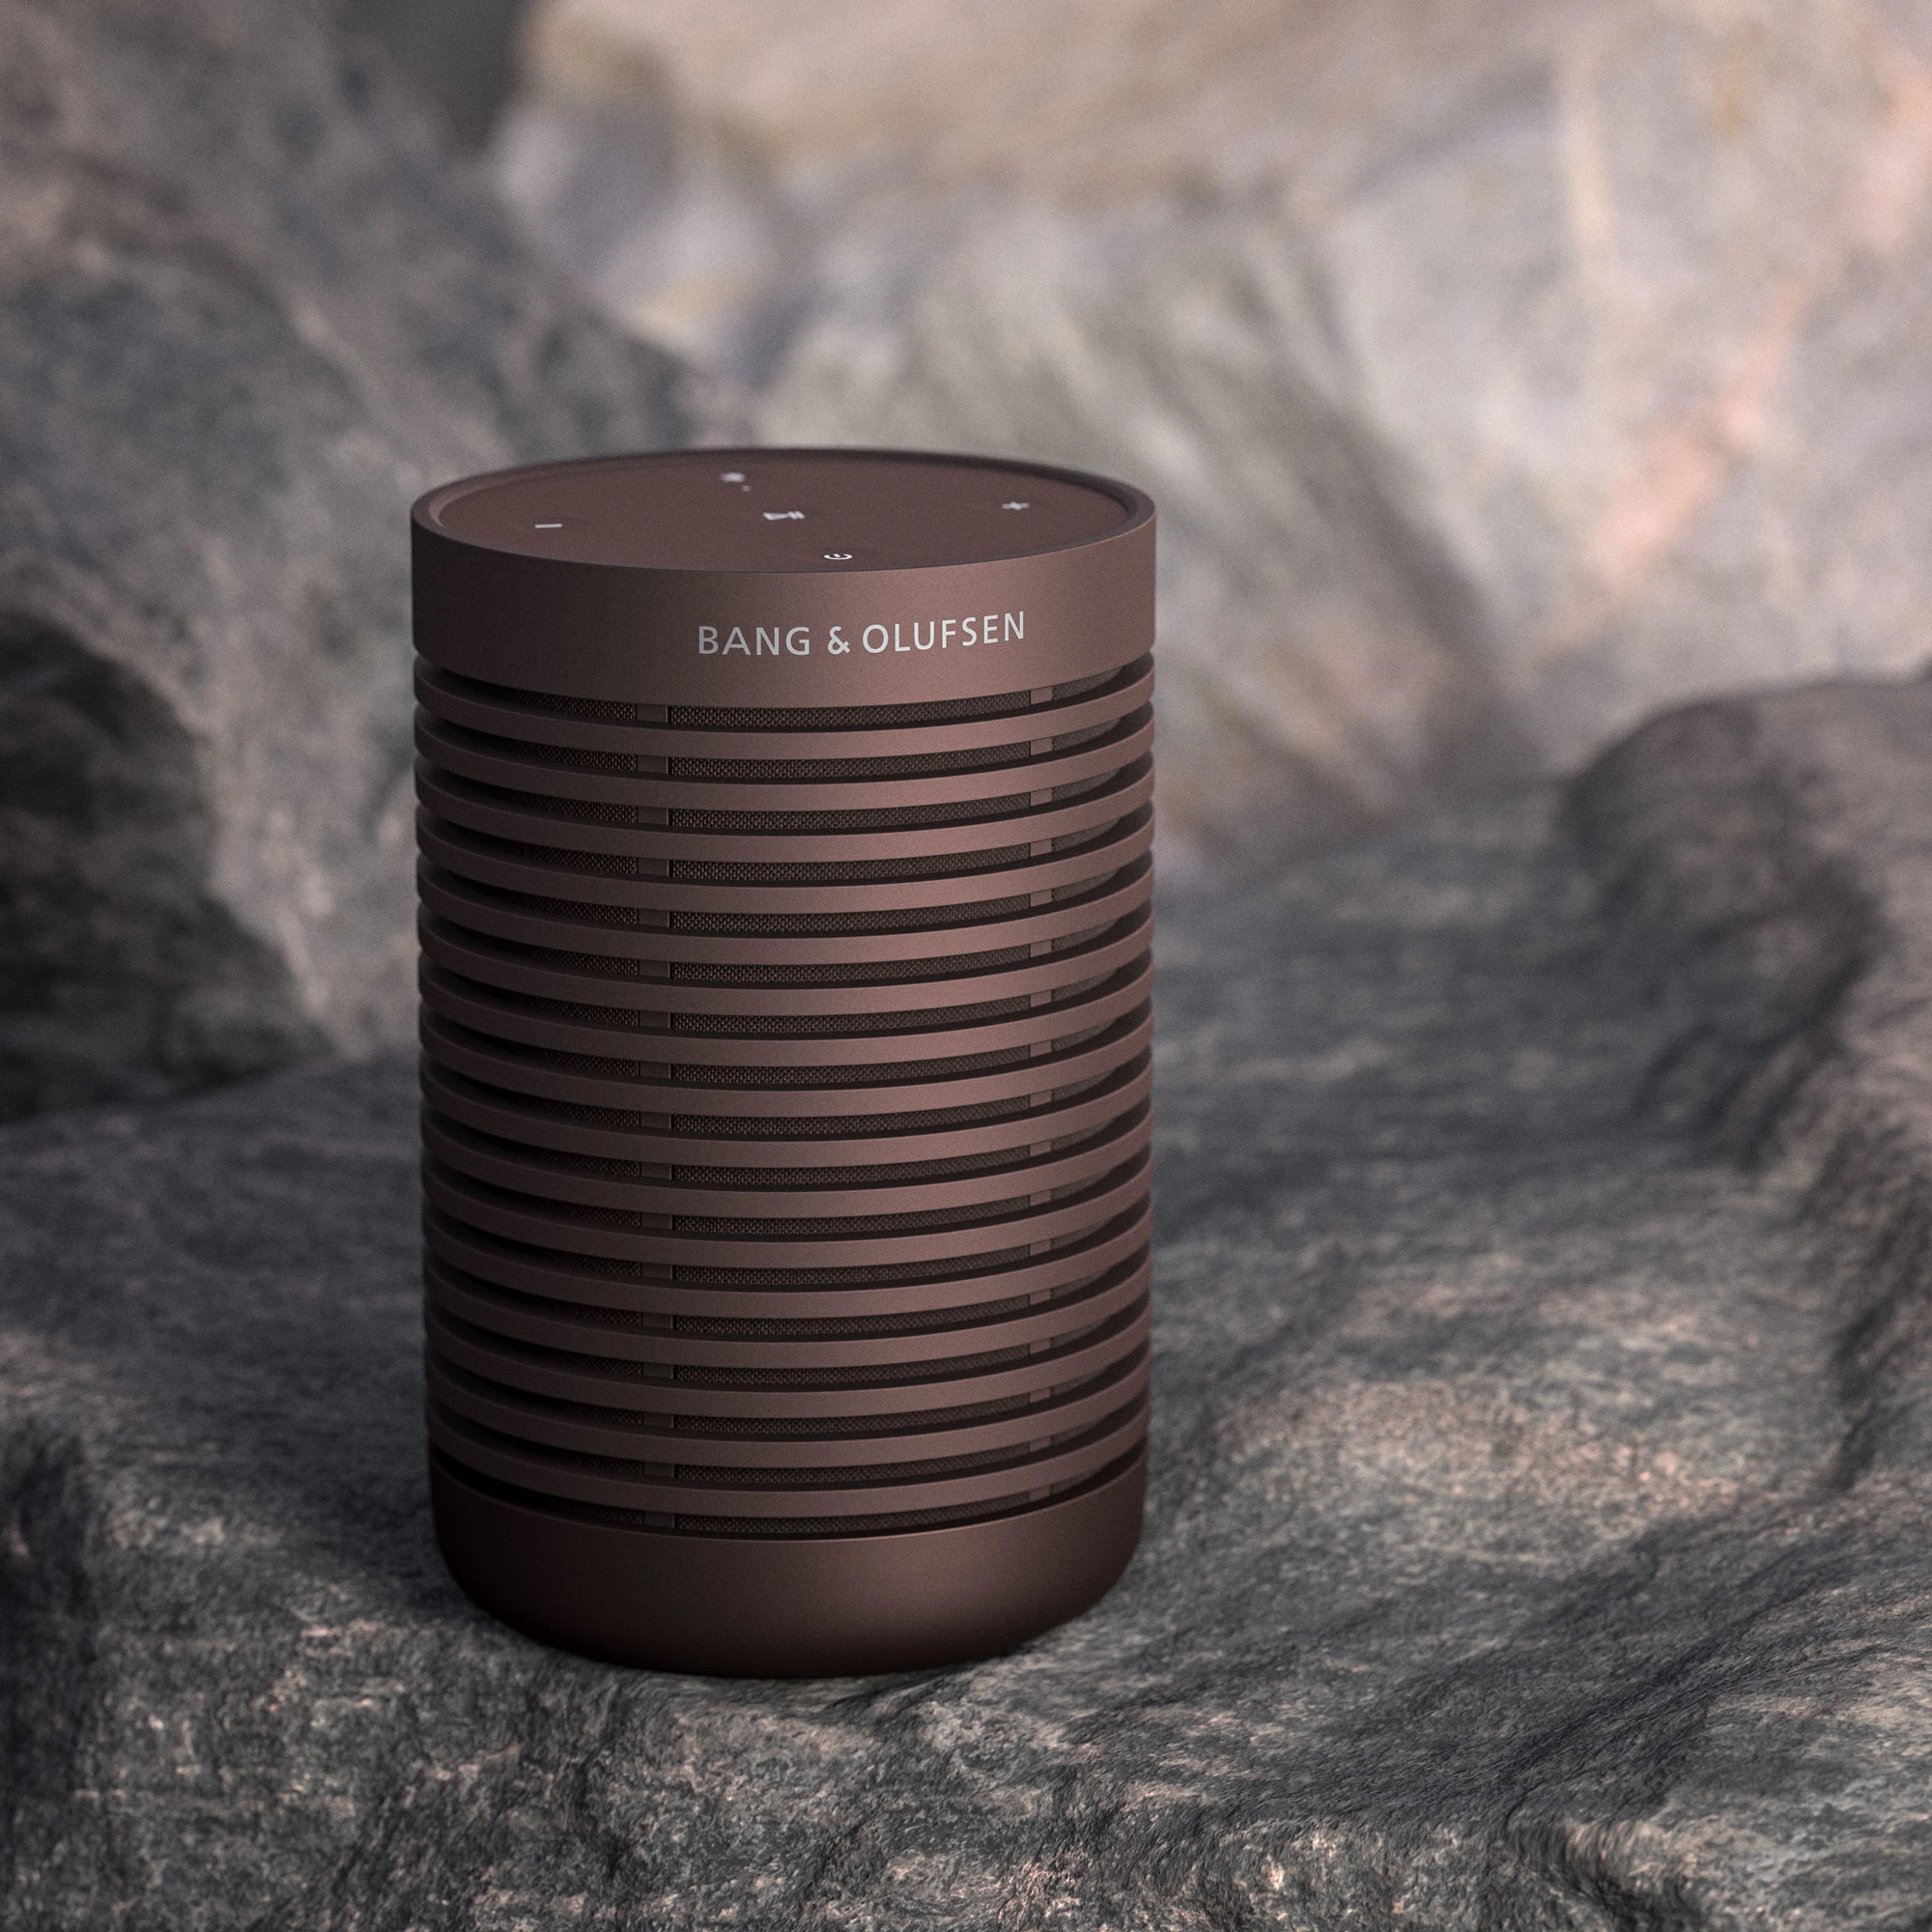 Image of the Beosound Explore portable speaker in the colour Chestnut on a rock